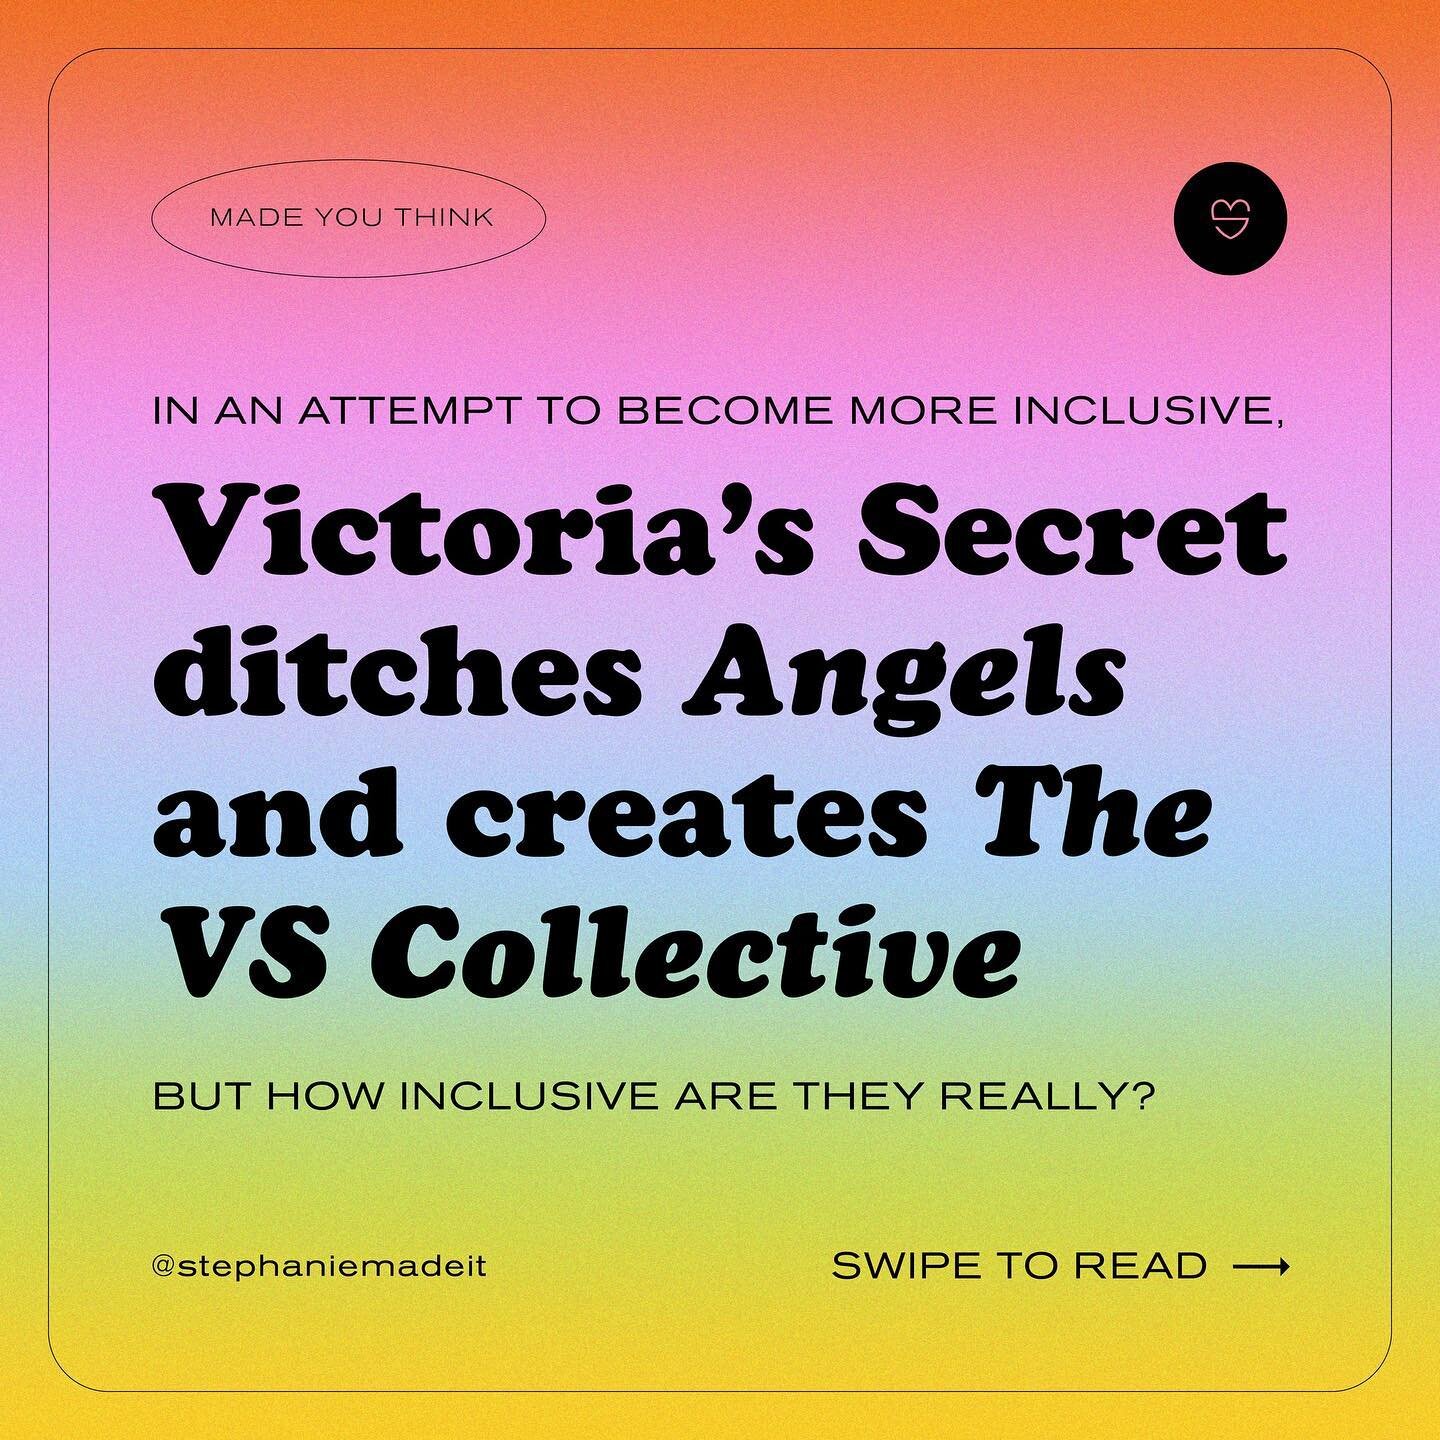 This is my first time trying out a postessay format called #madeyouthink. In these, I will be sharing my thoughts on ethical branding, socio-political themes, philosophy, and more. ⁠⁠
⁠⁠
My first postessay is about how Victoria's Secret The VS Collec